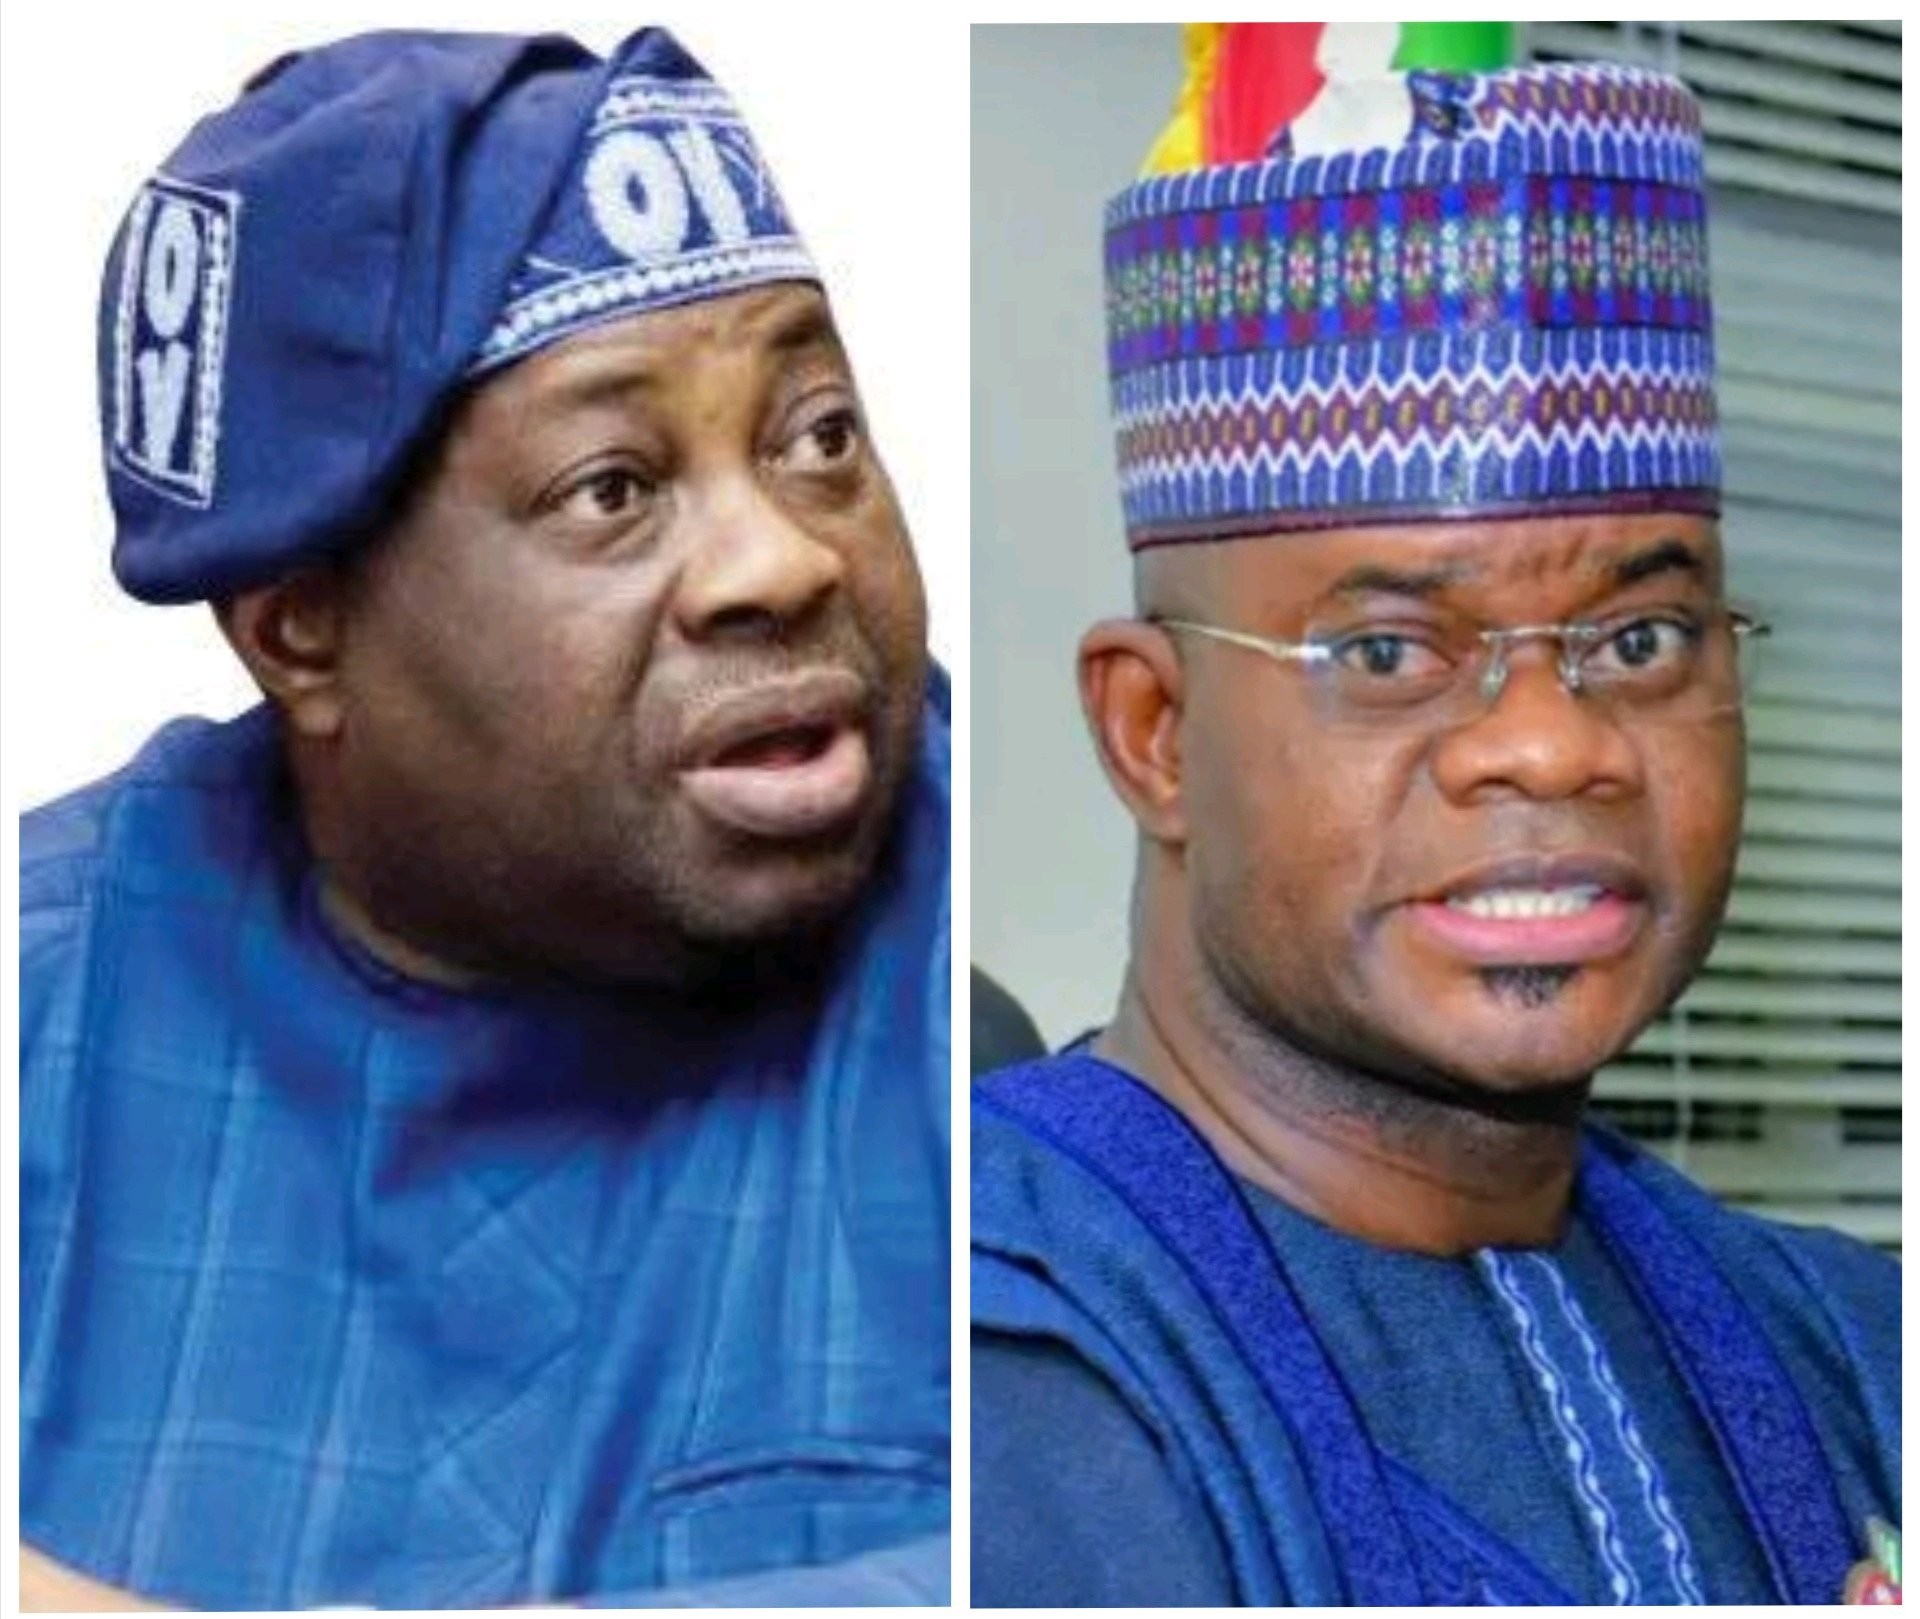 Momodu stated. "They says He Paid Upfront Just Before He Left Govt, When I Checked, That's Not What Happened"